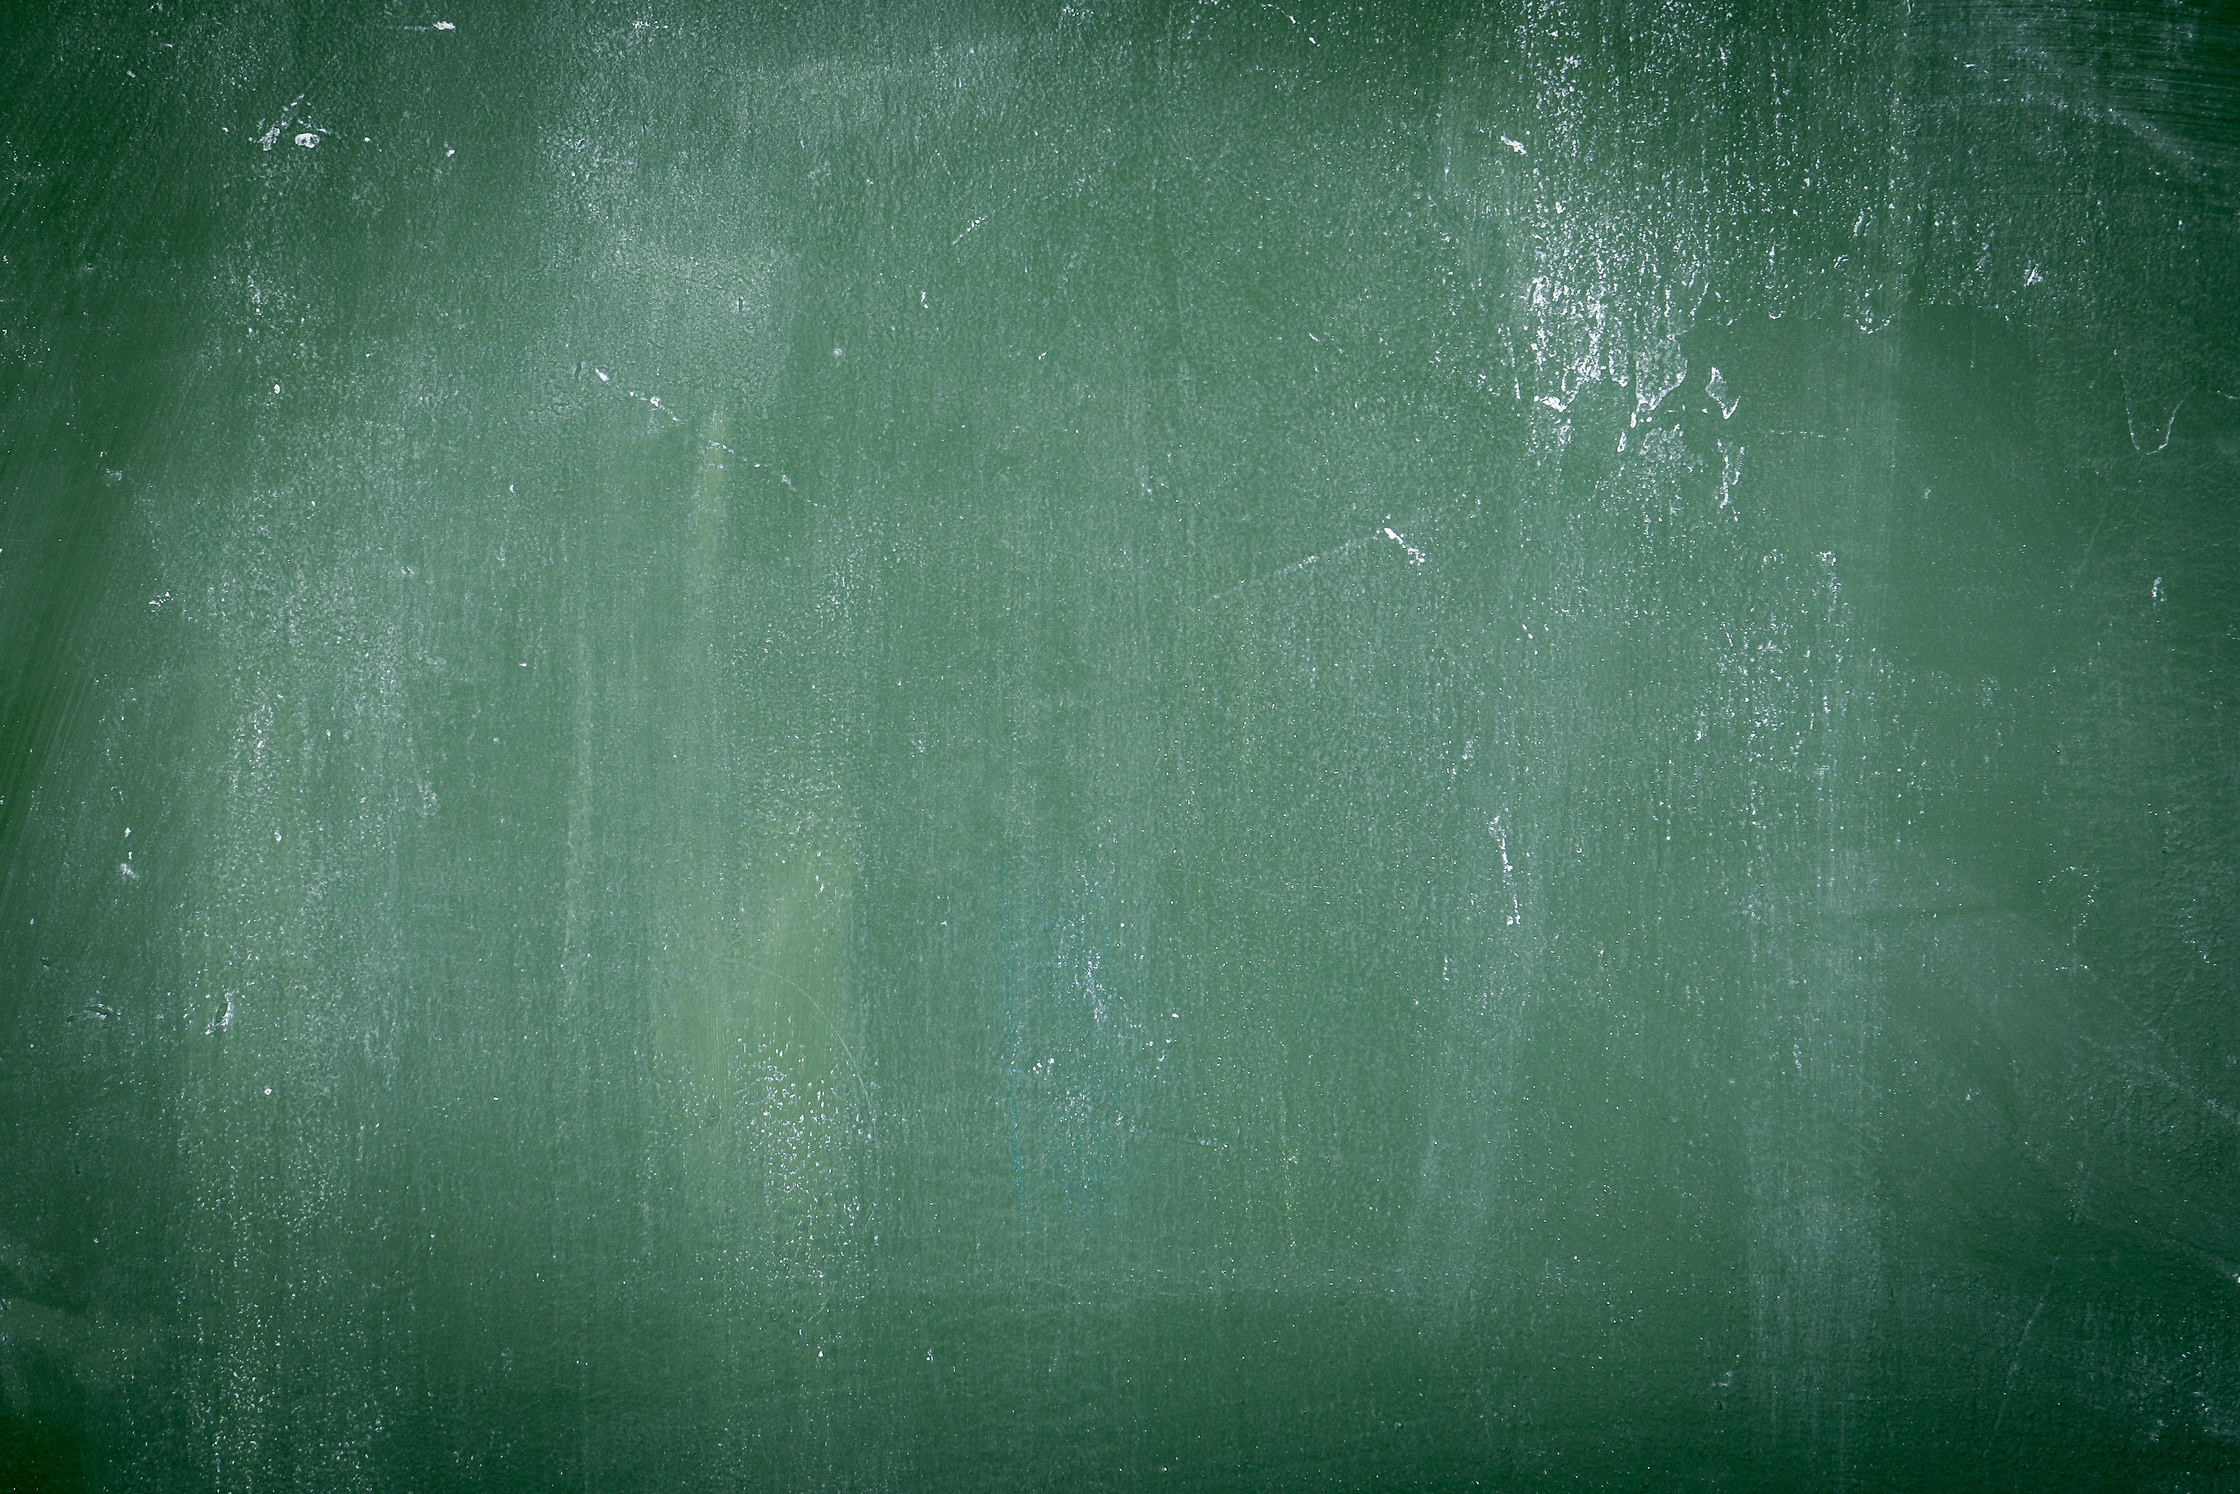 Green chalk board with texture and white chalk marks